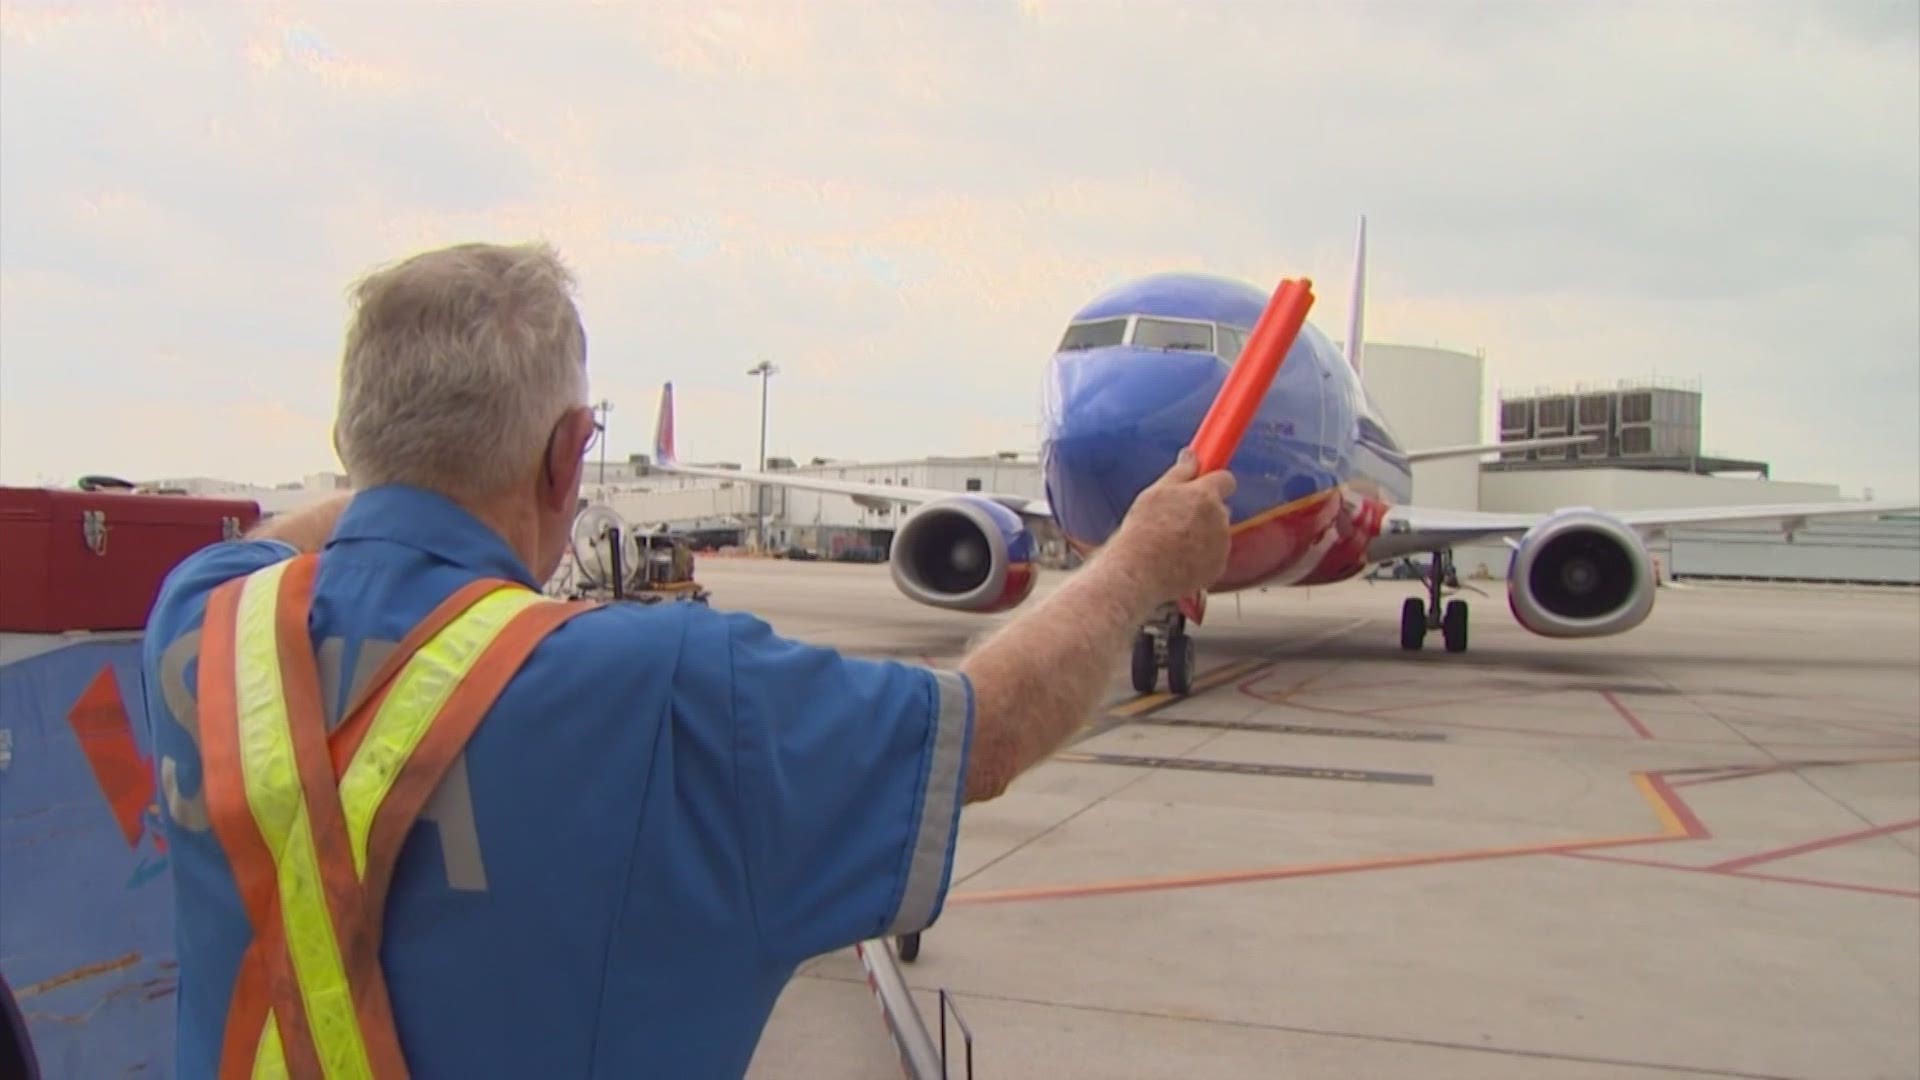 Southwest Airlines celebrates 50 years in service this year. And Gary Kelly had been CEO for the past 17.